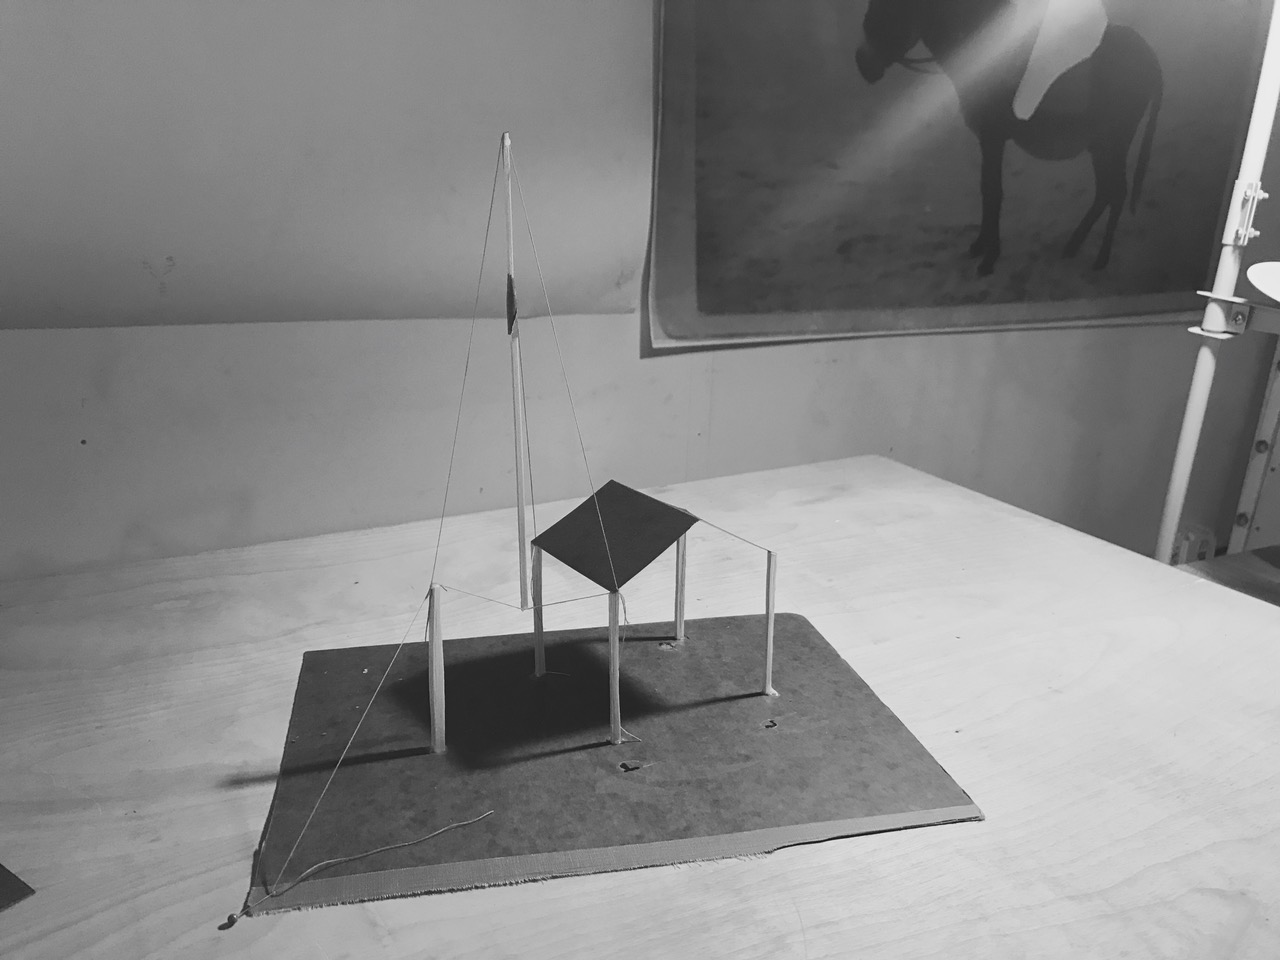 A sculpture sits on a table.